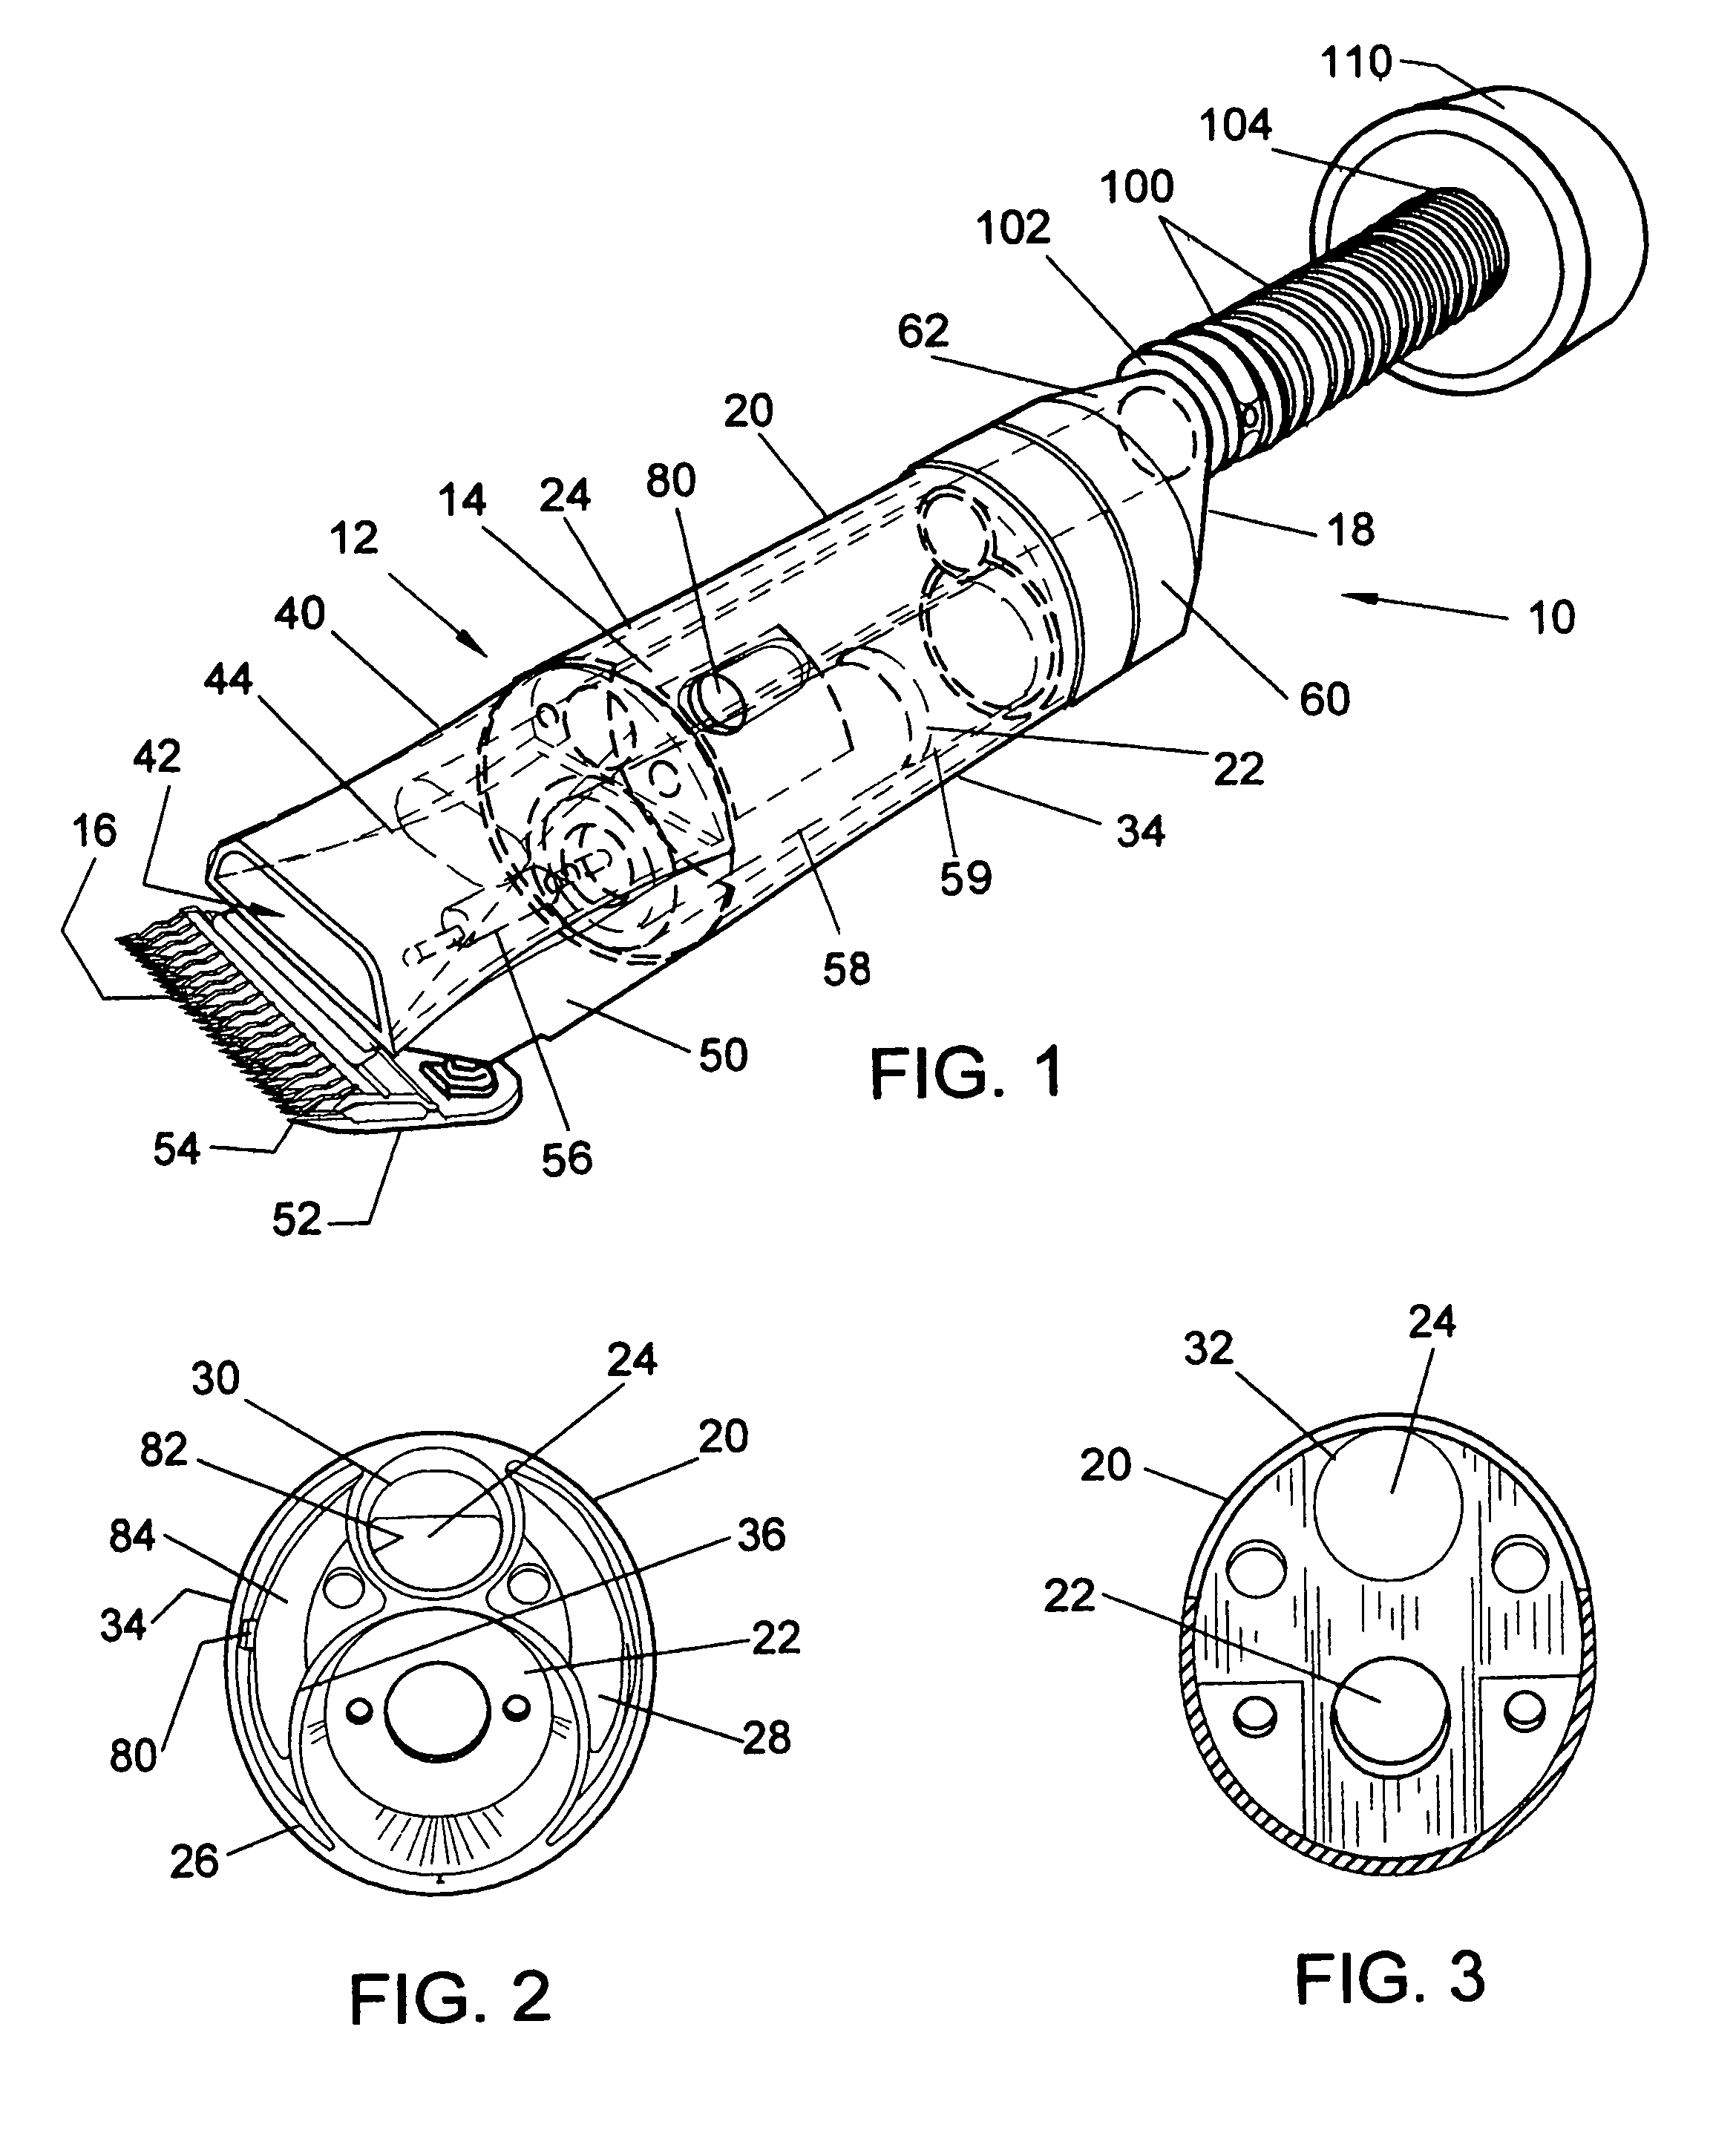 Hair cutting device with vacuum hair collection system